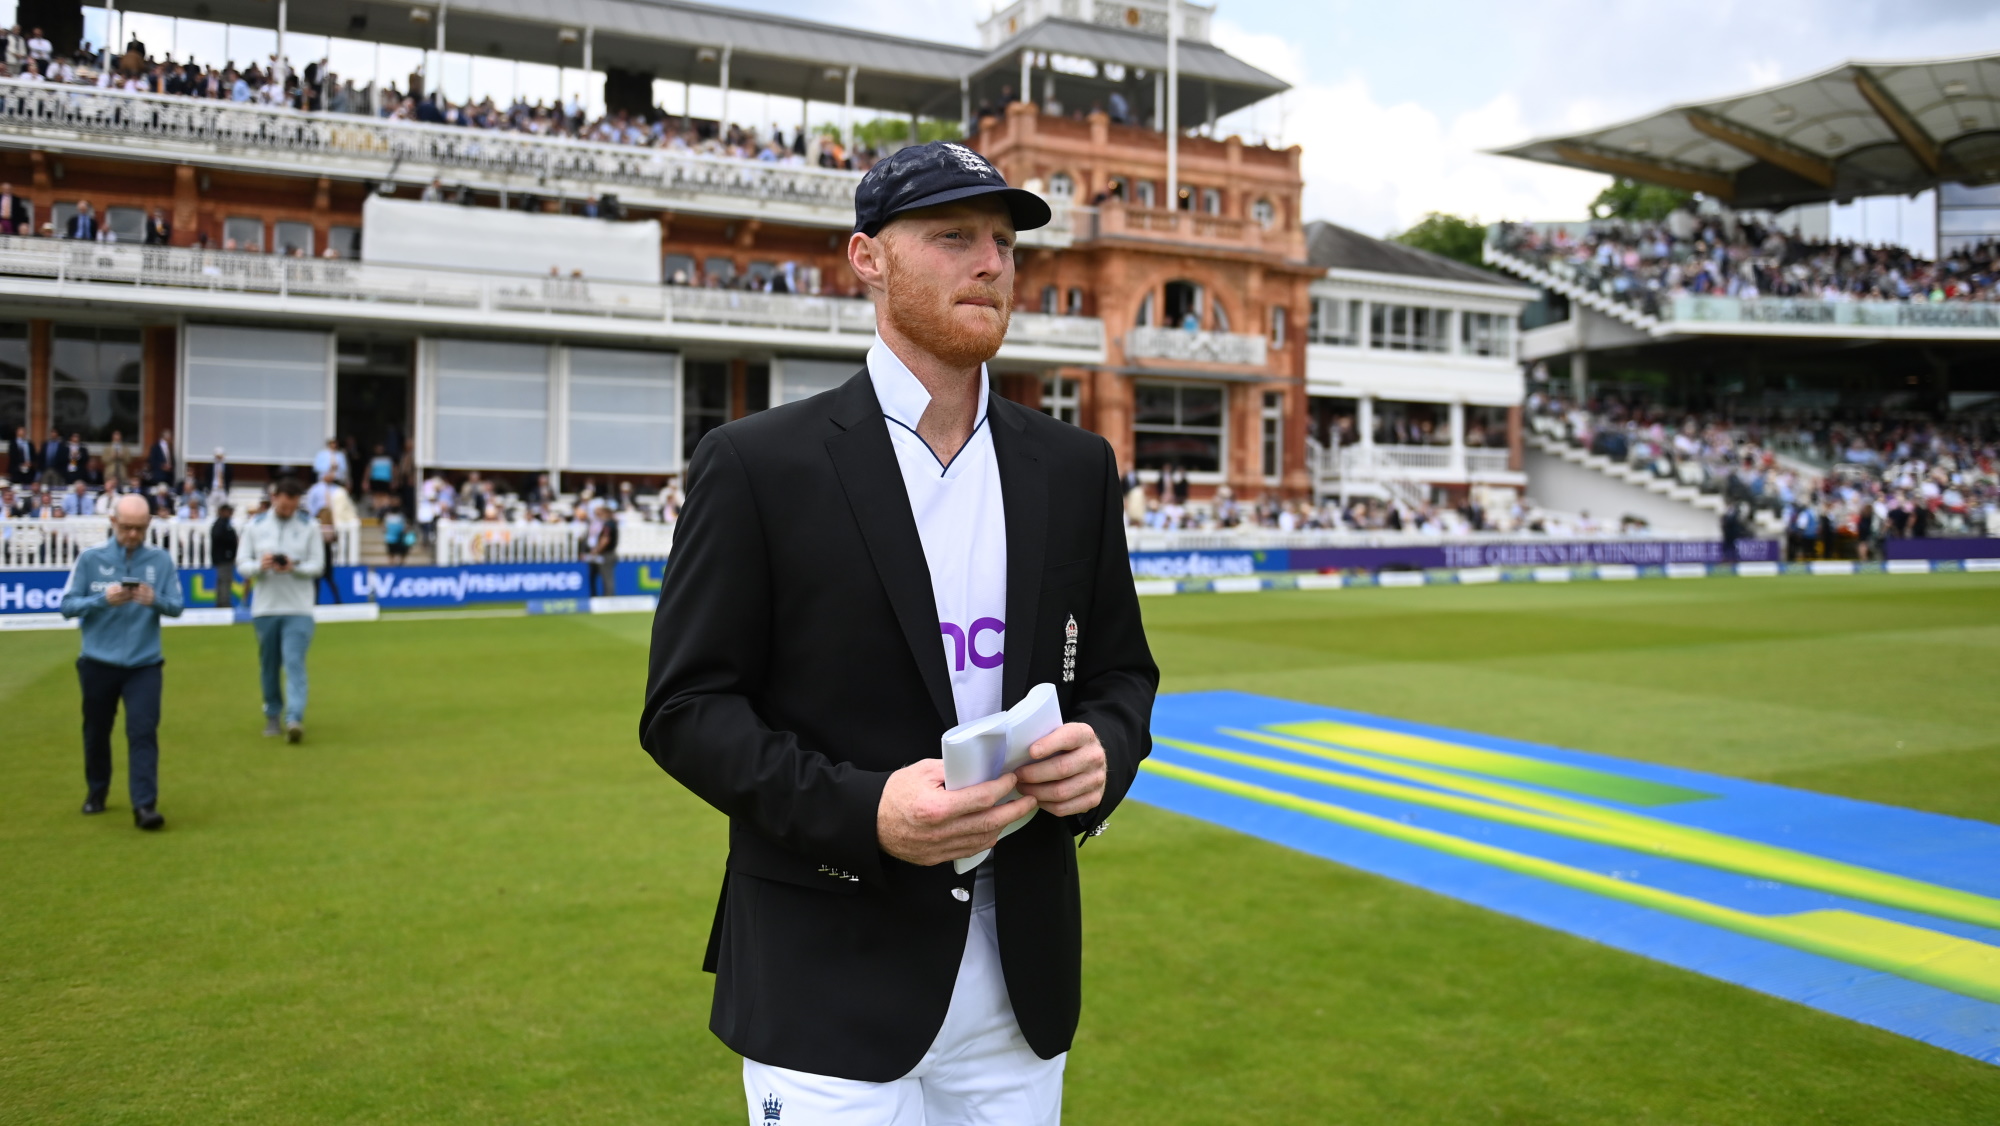 Ben Stokes at Lord's cricket ground